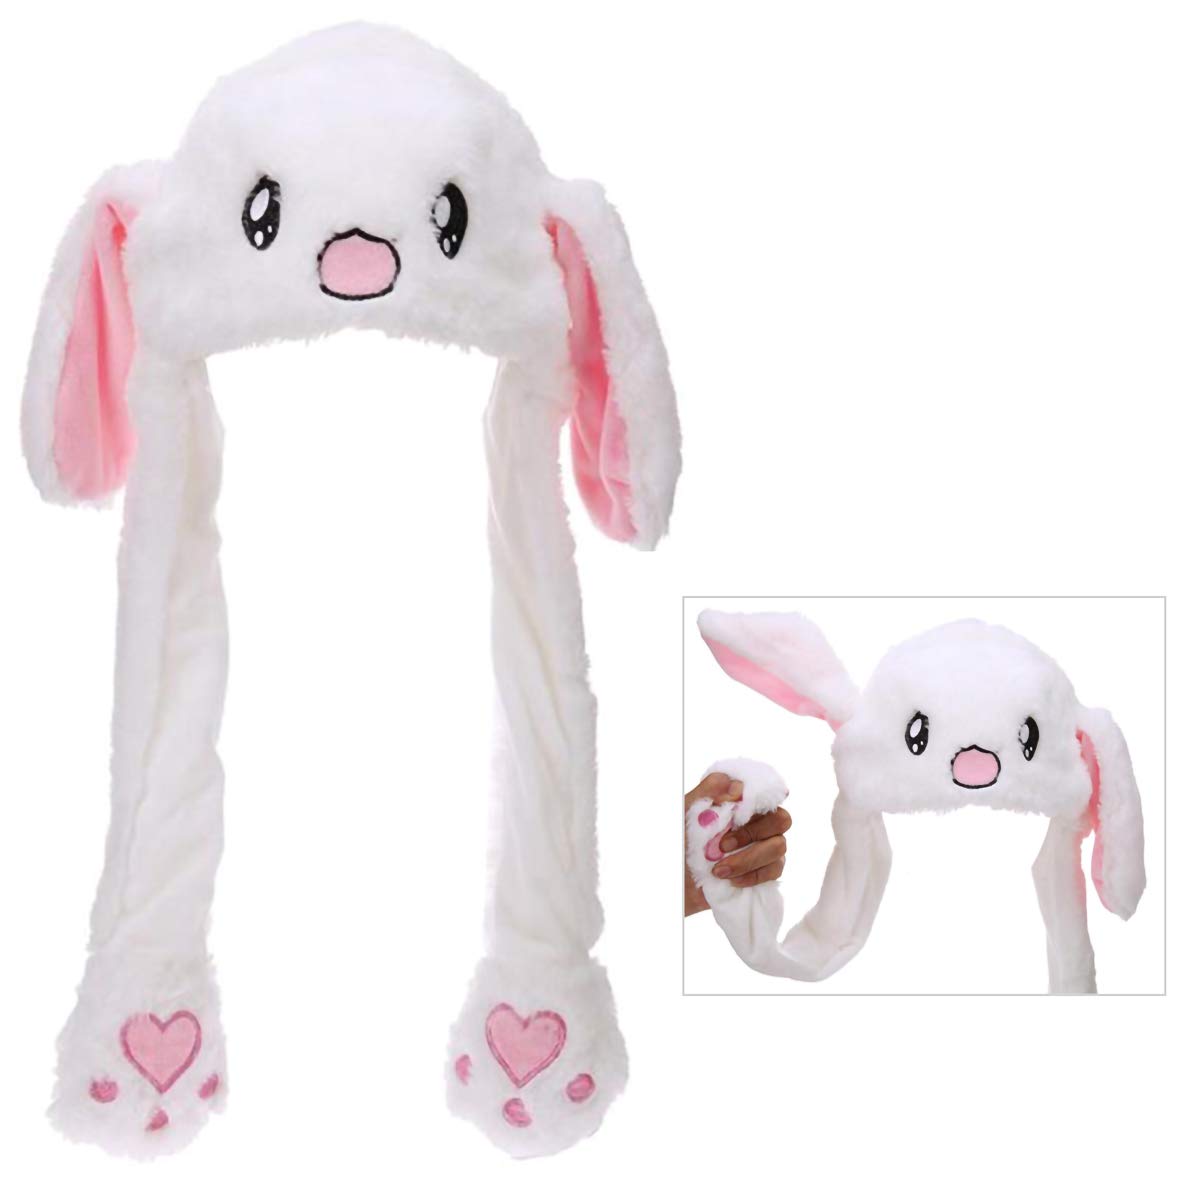 IronBuddy Rabbit Hat Ear Moving Jumping Hat Funny Bunny Plush Hat Cap for Women Girls, Cosplay Christmas Party Holiday Hat (White)